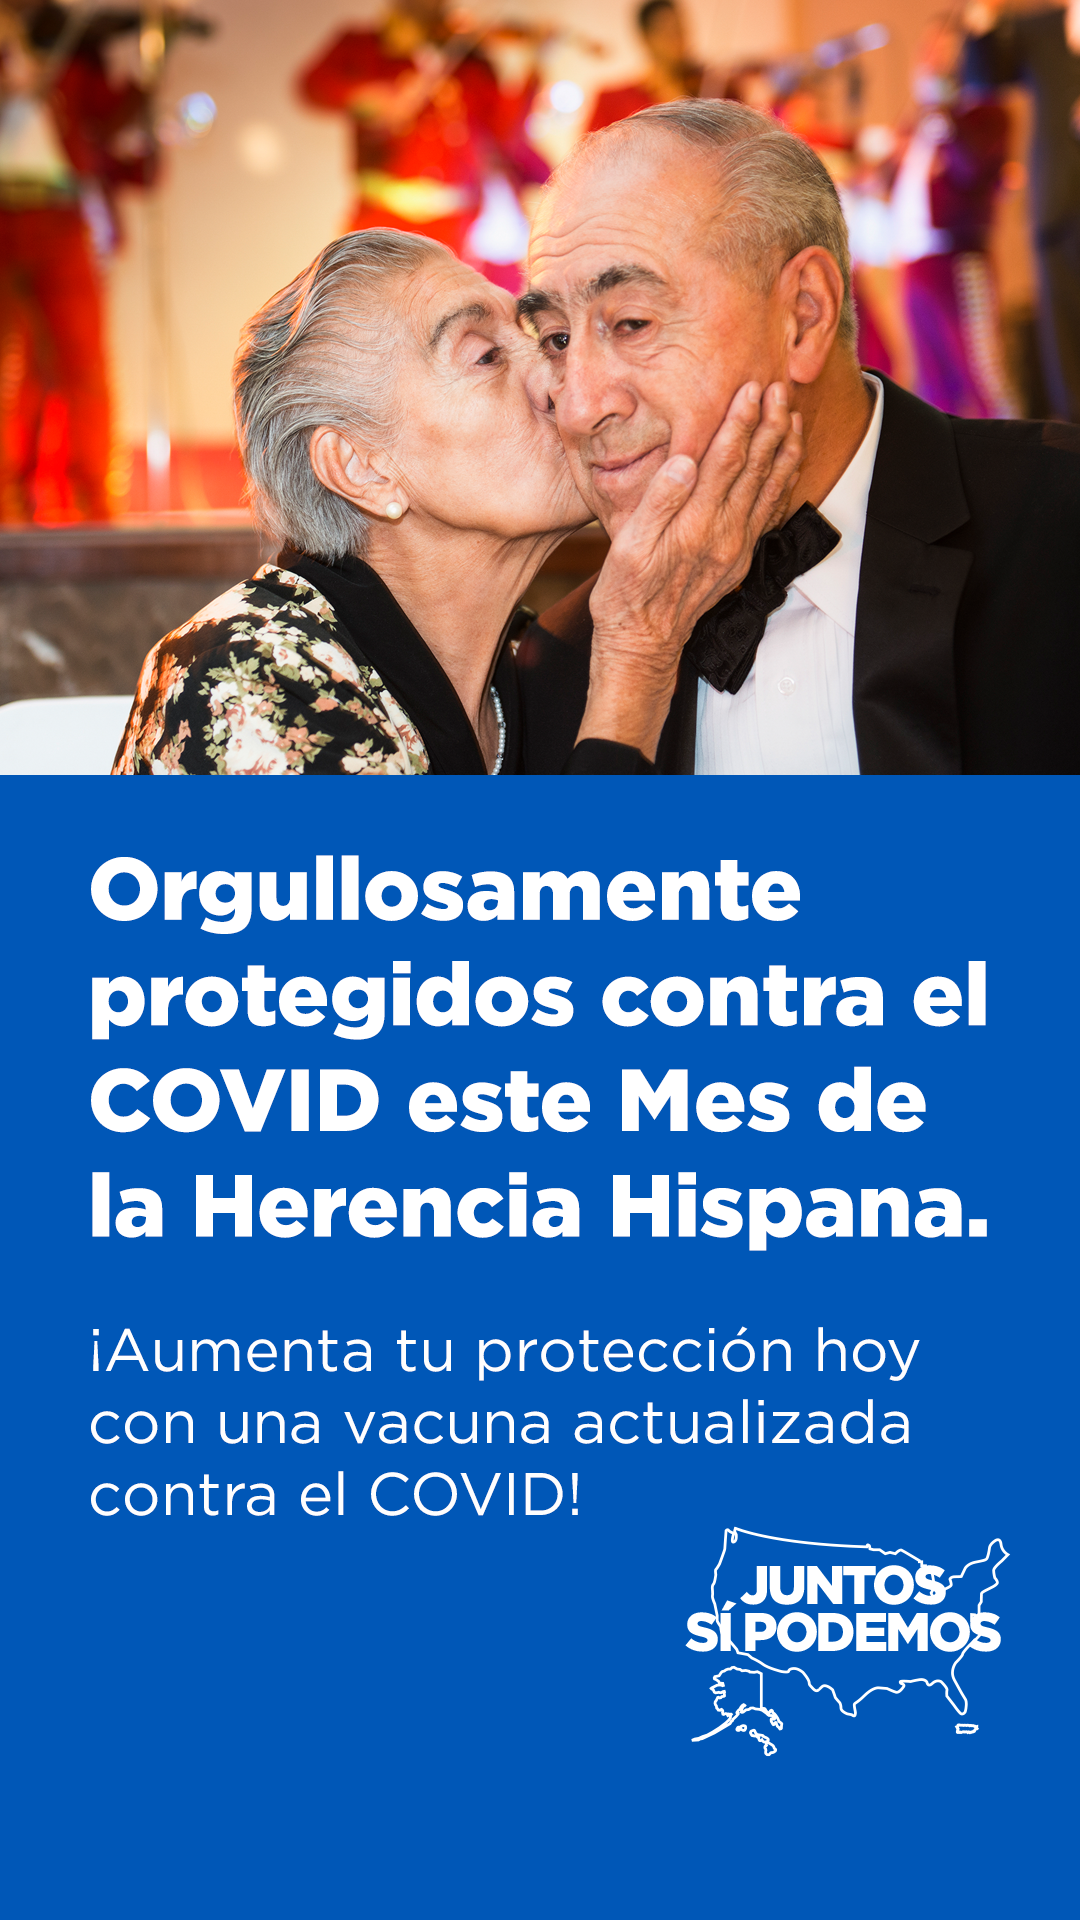 An older Hispanic couple, a man and a woman. The woman kisses the man on the cheek. Below the picture is white text on a blue background.